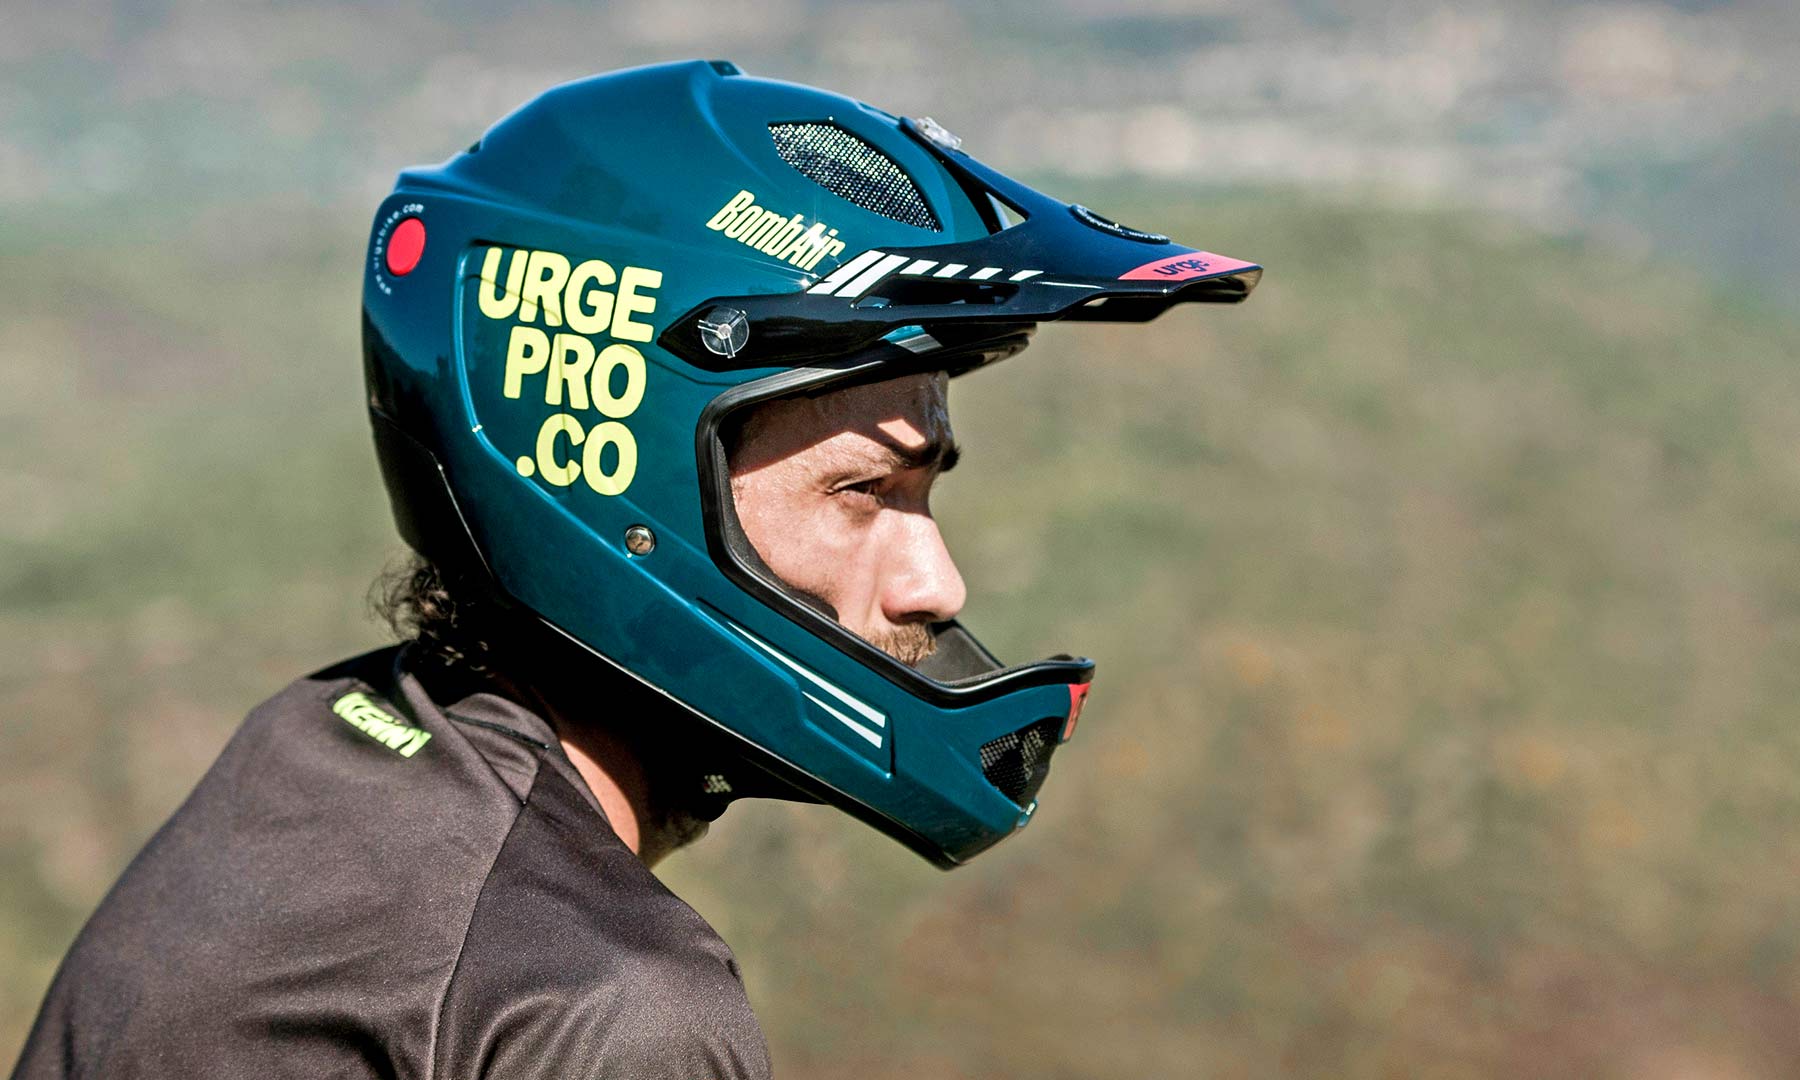 Urge BombAir drops in light, affordable full face DH helmet protection